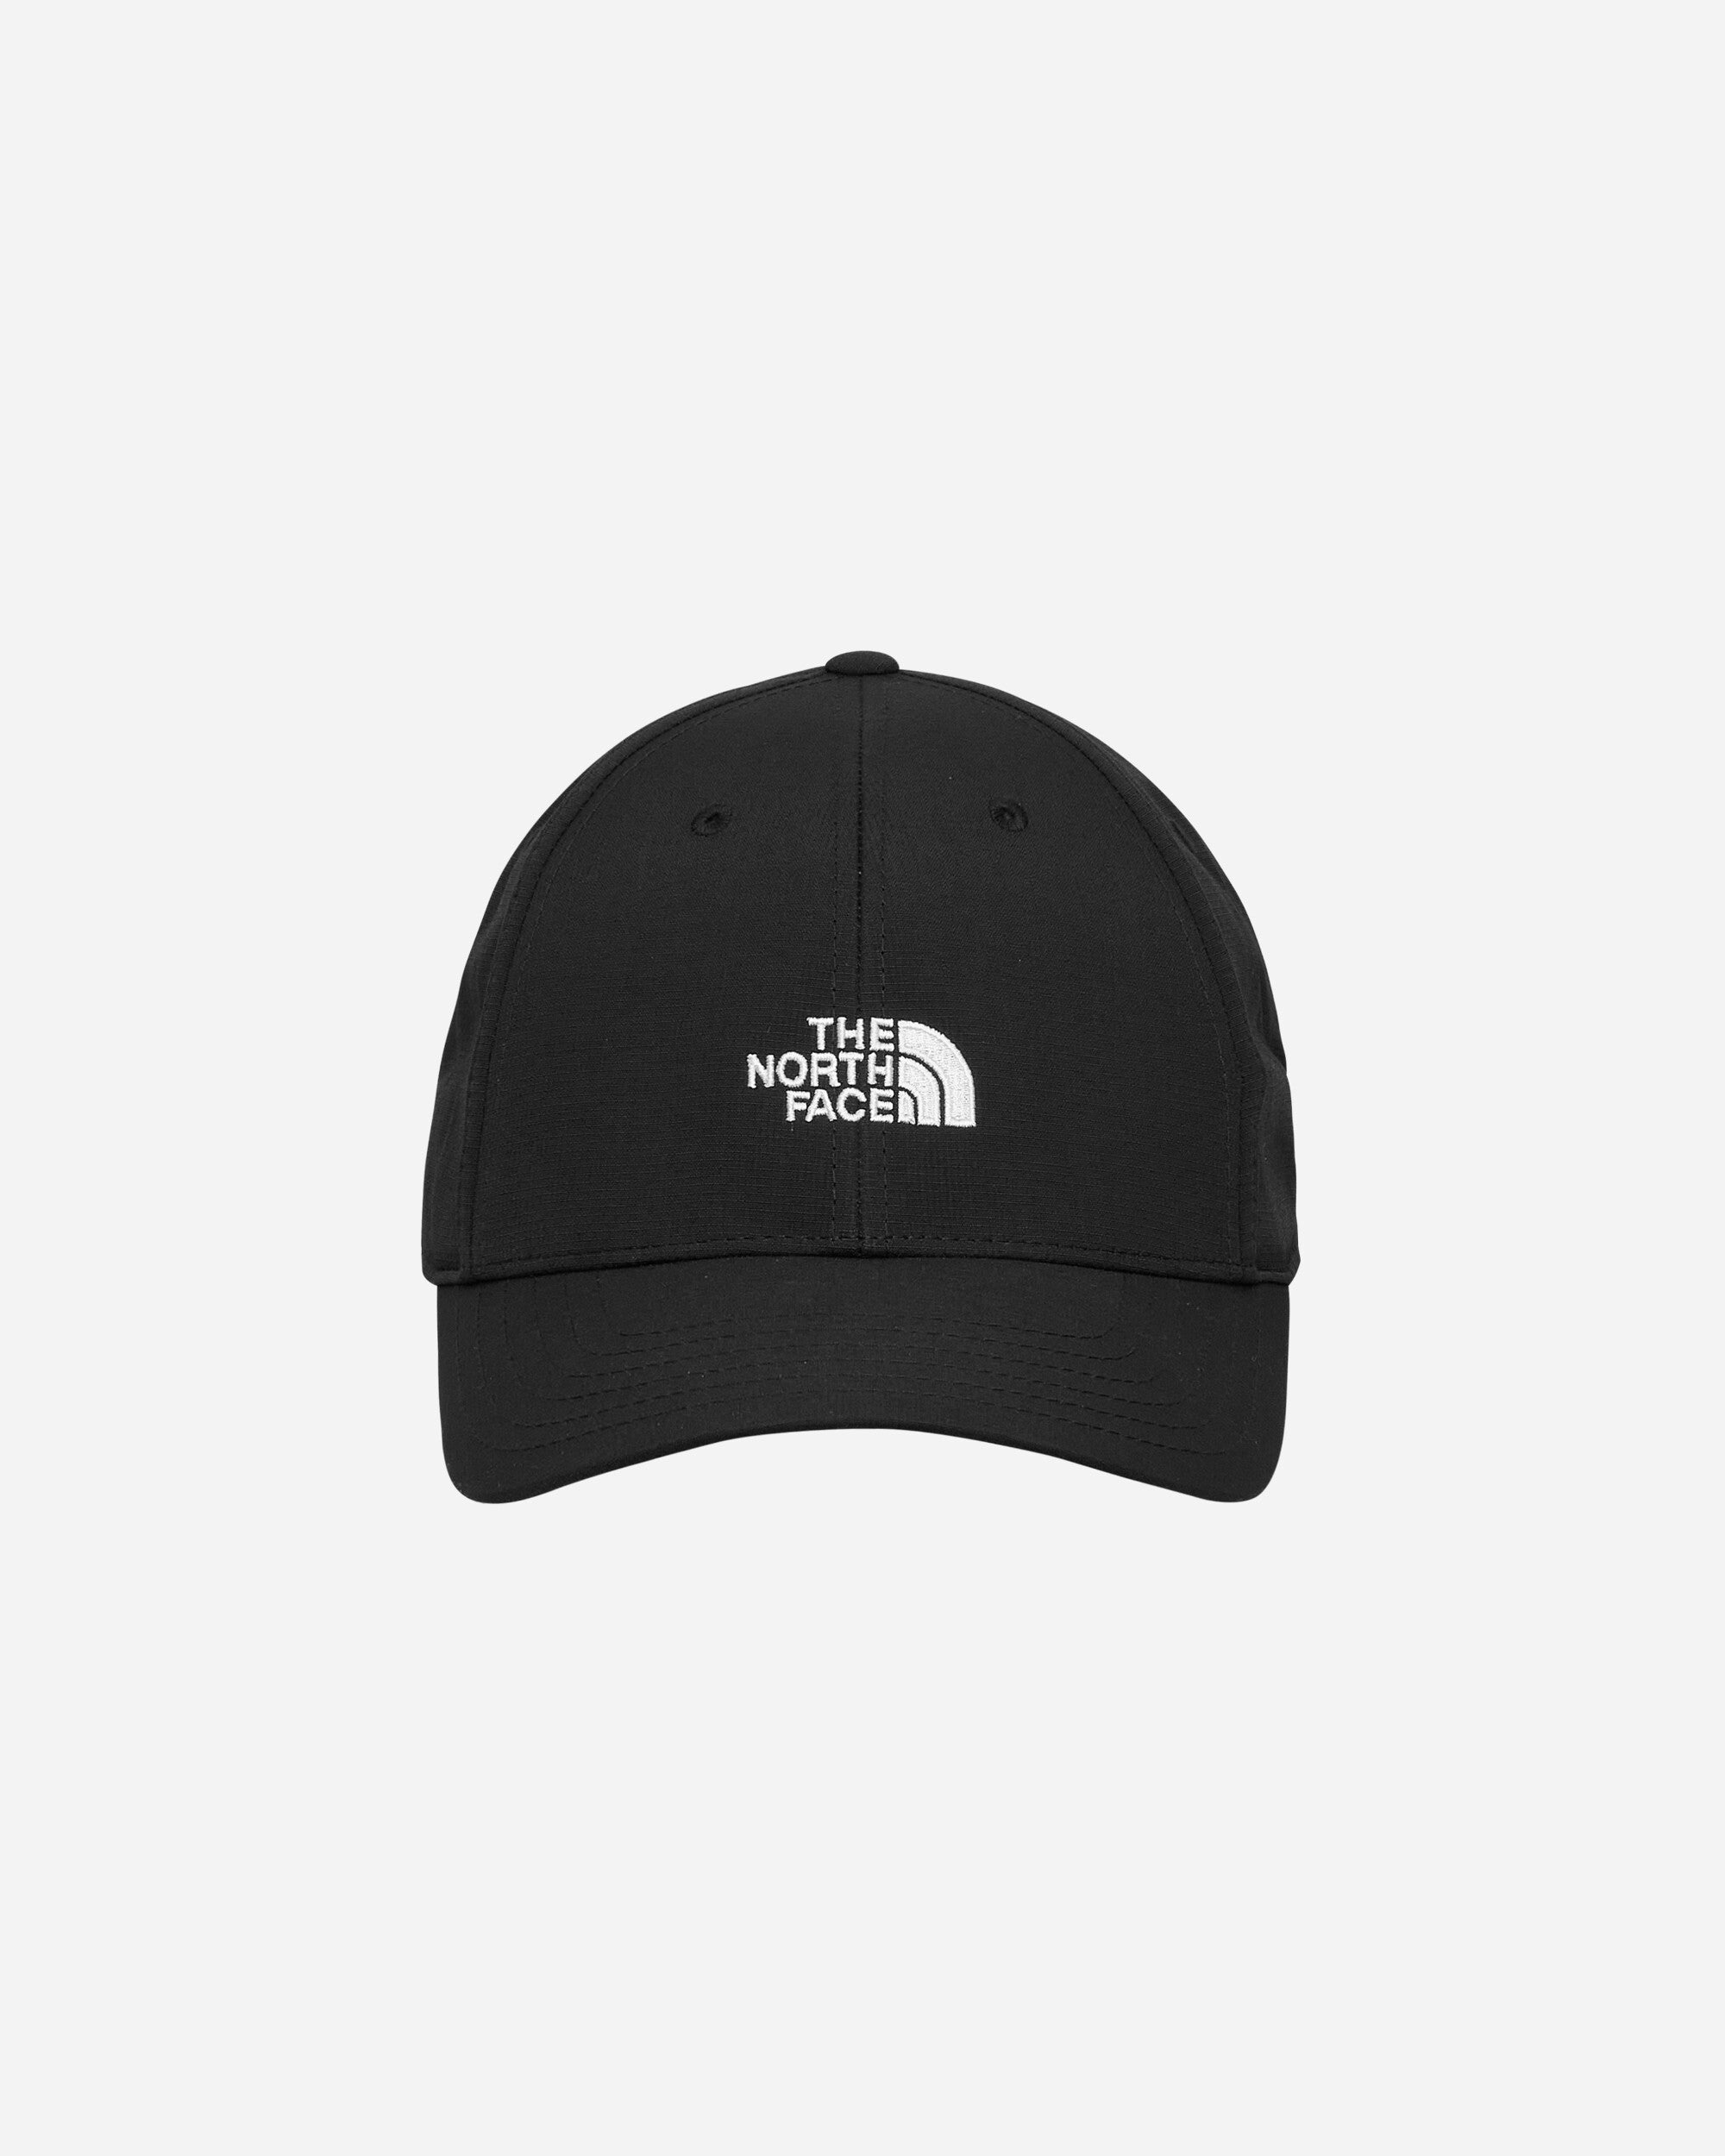 The North Face 66 Tech Hat Tnf Black/Tnf White Hats Caps NF0A7WHC KY41